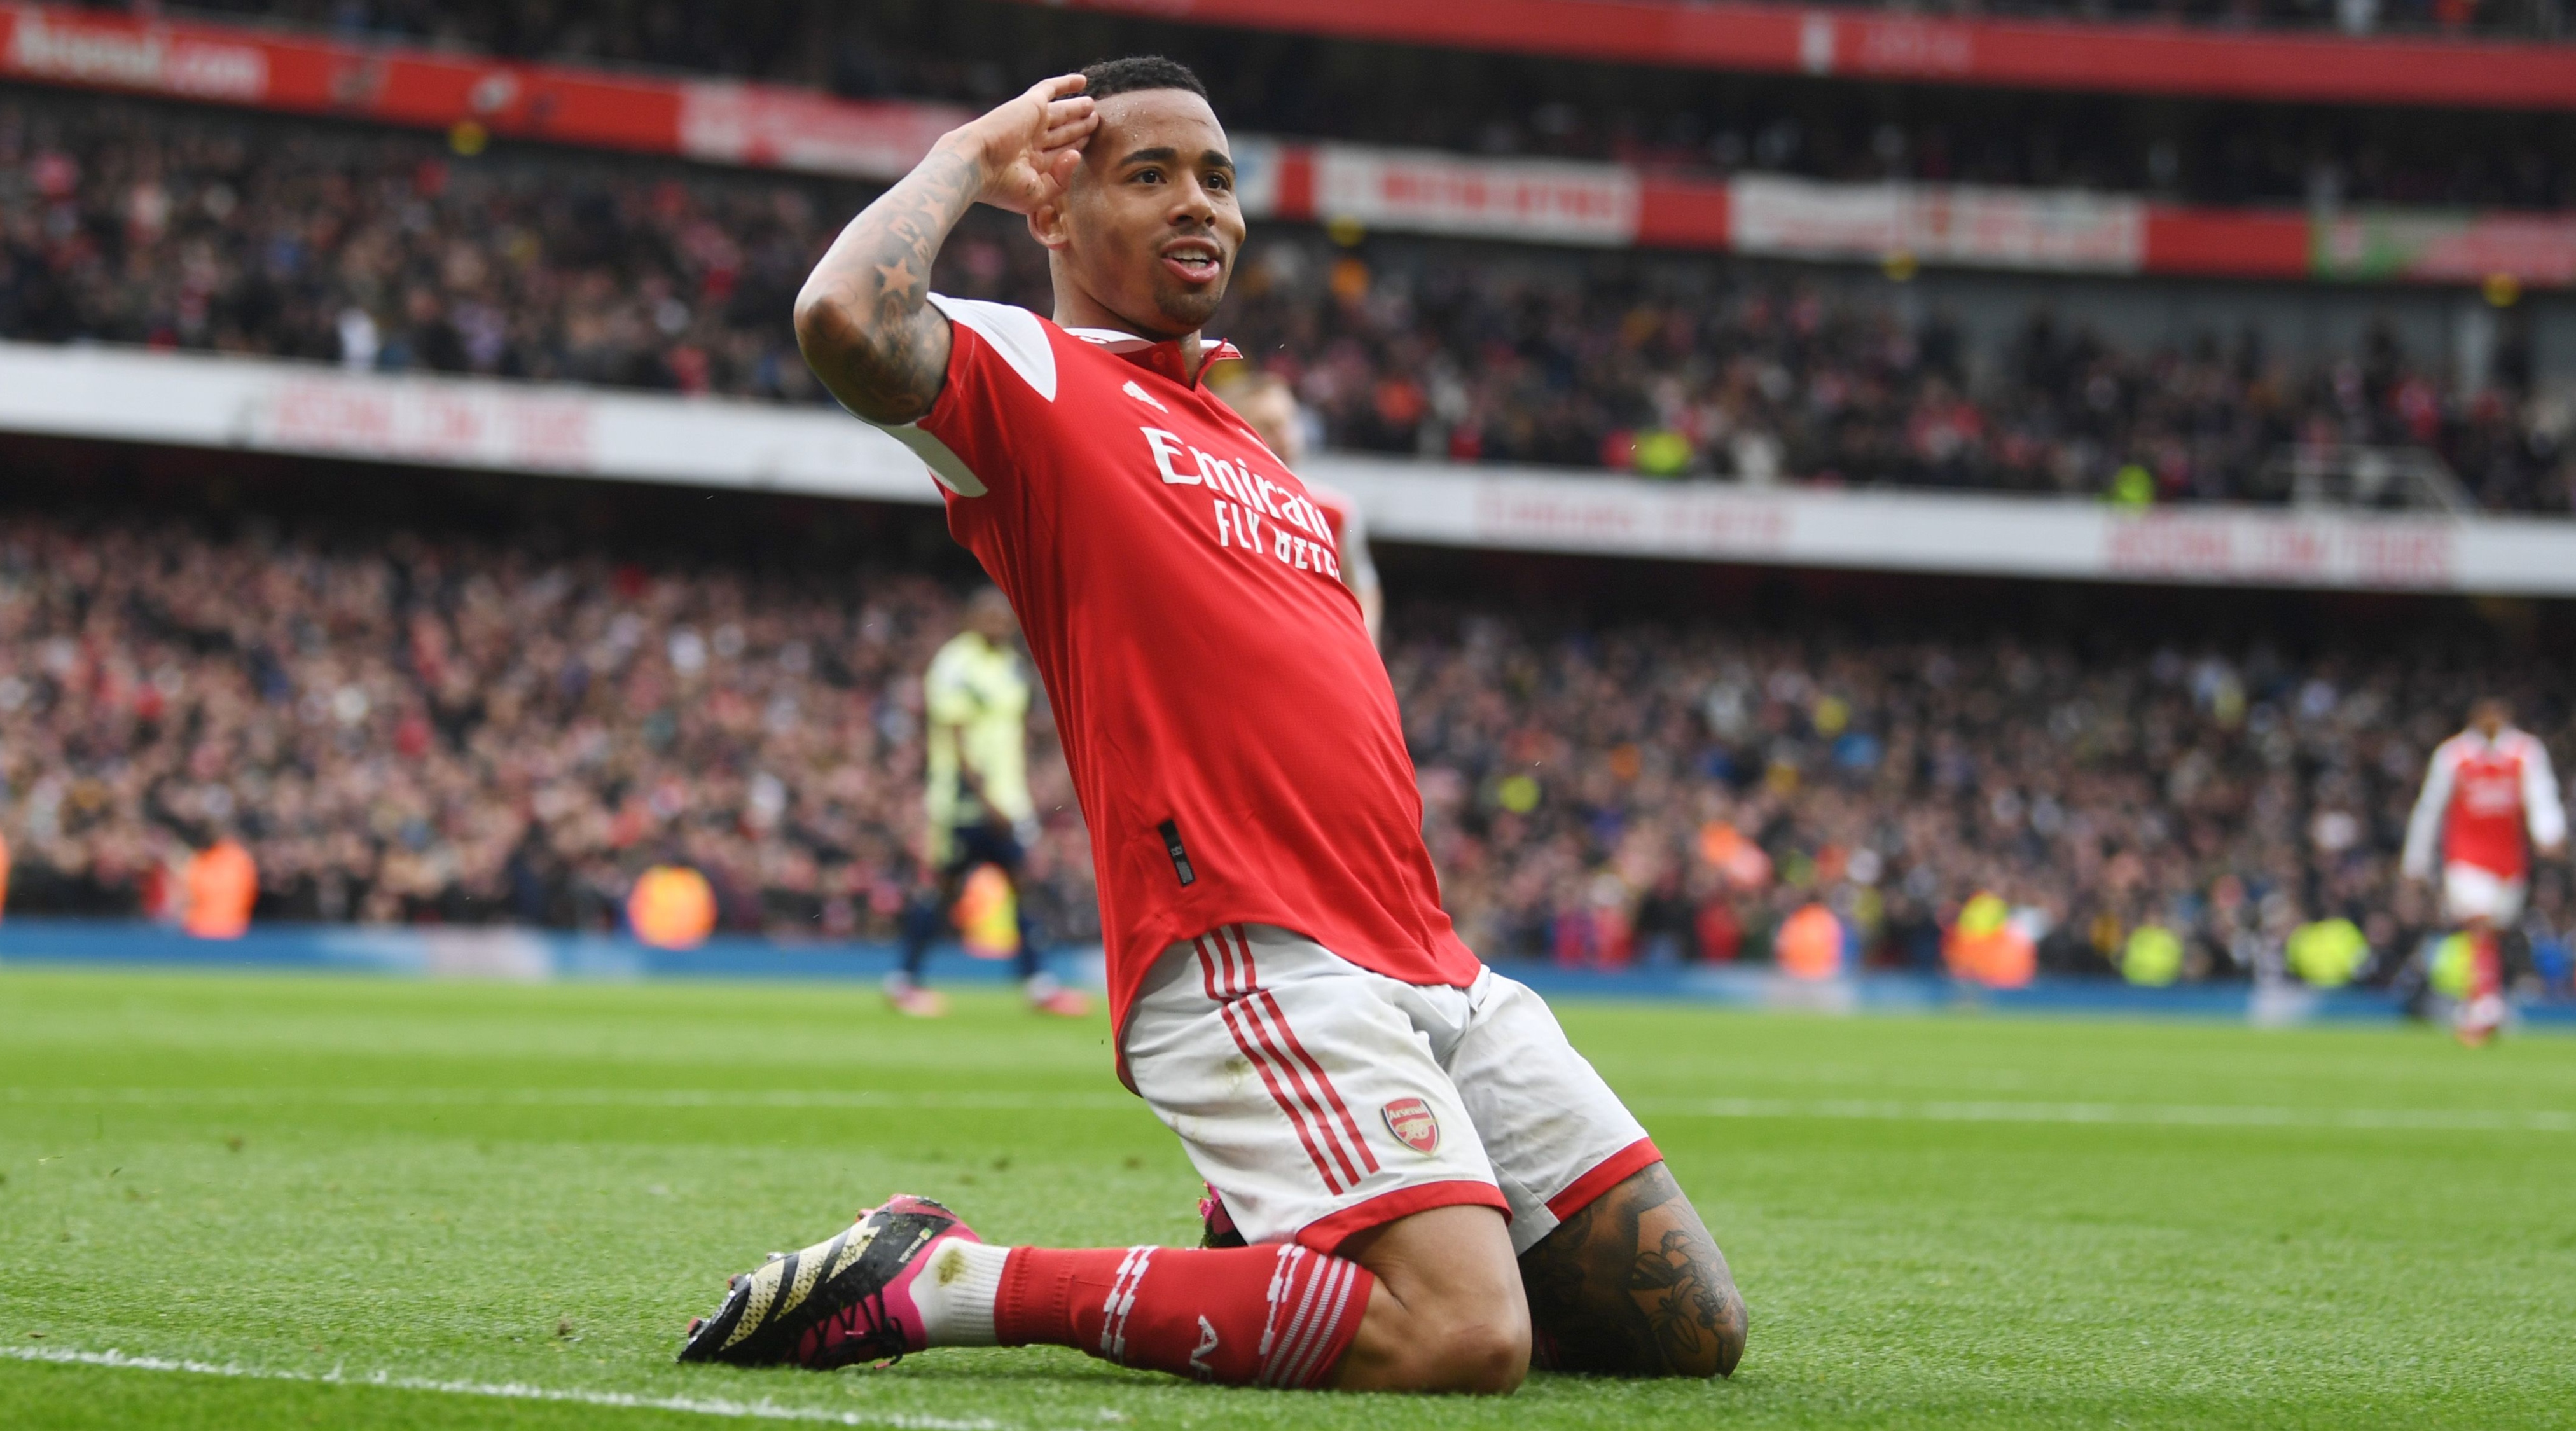 Gabriel Jesus of Arsenal celebrates after scoring his team's third goal during the Premier League match between Arsenal and Leeds United at the Emirates Stadium on April 1, 2023 in London, United Kingdom.